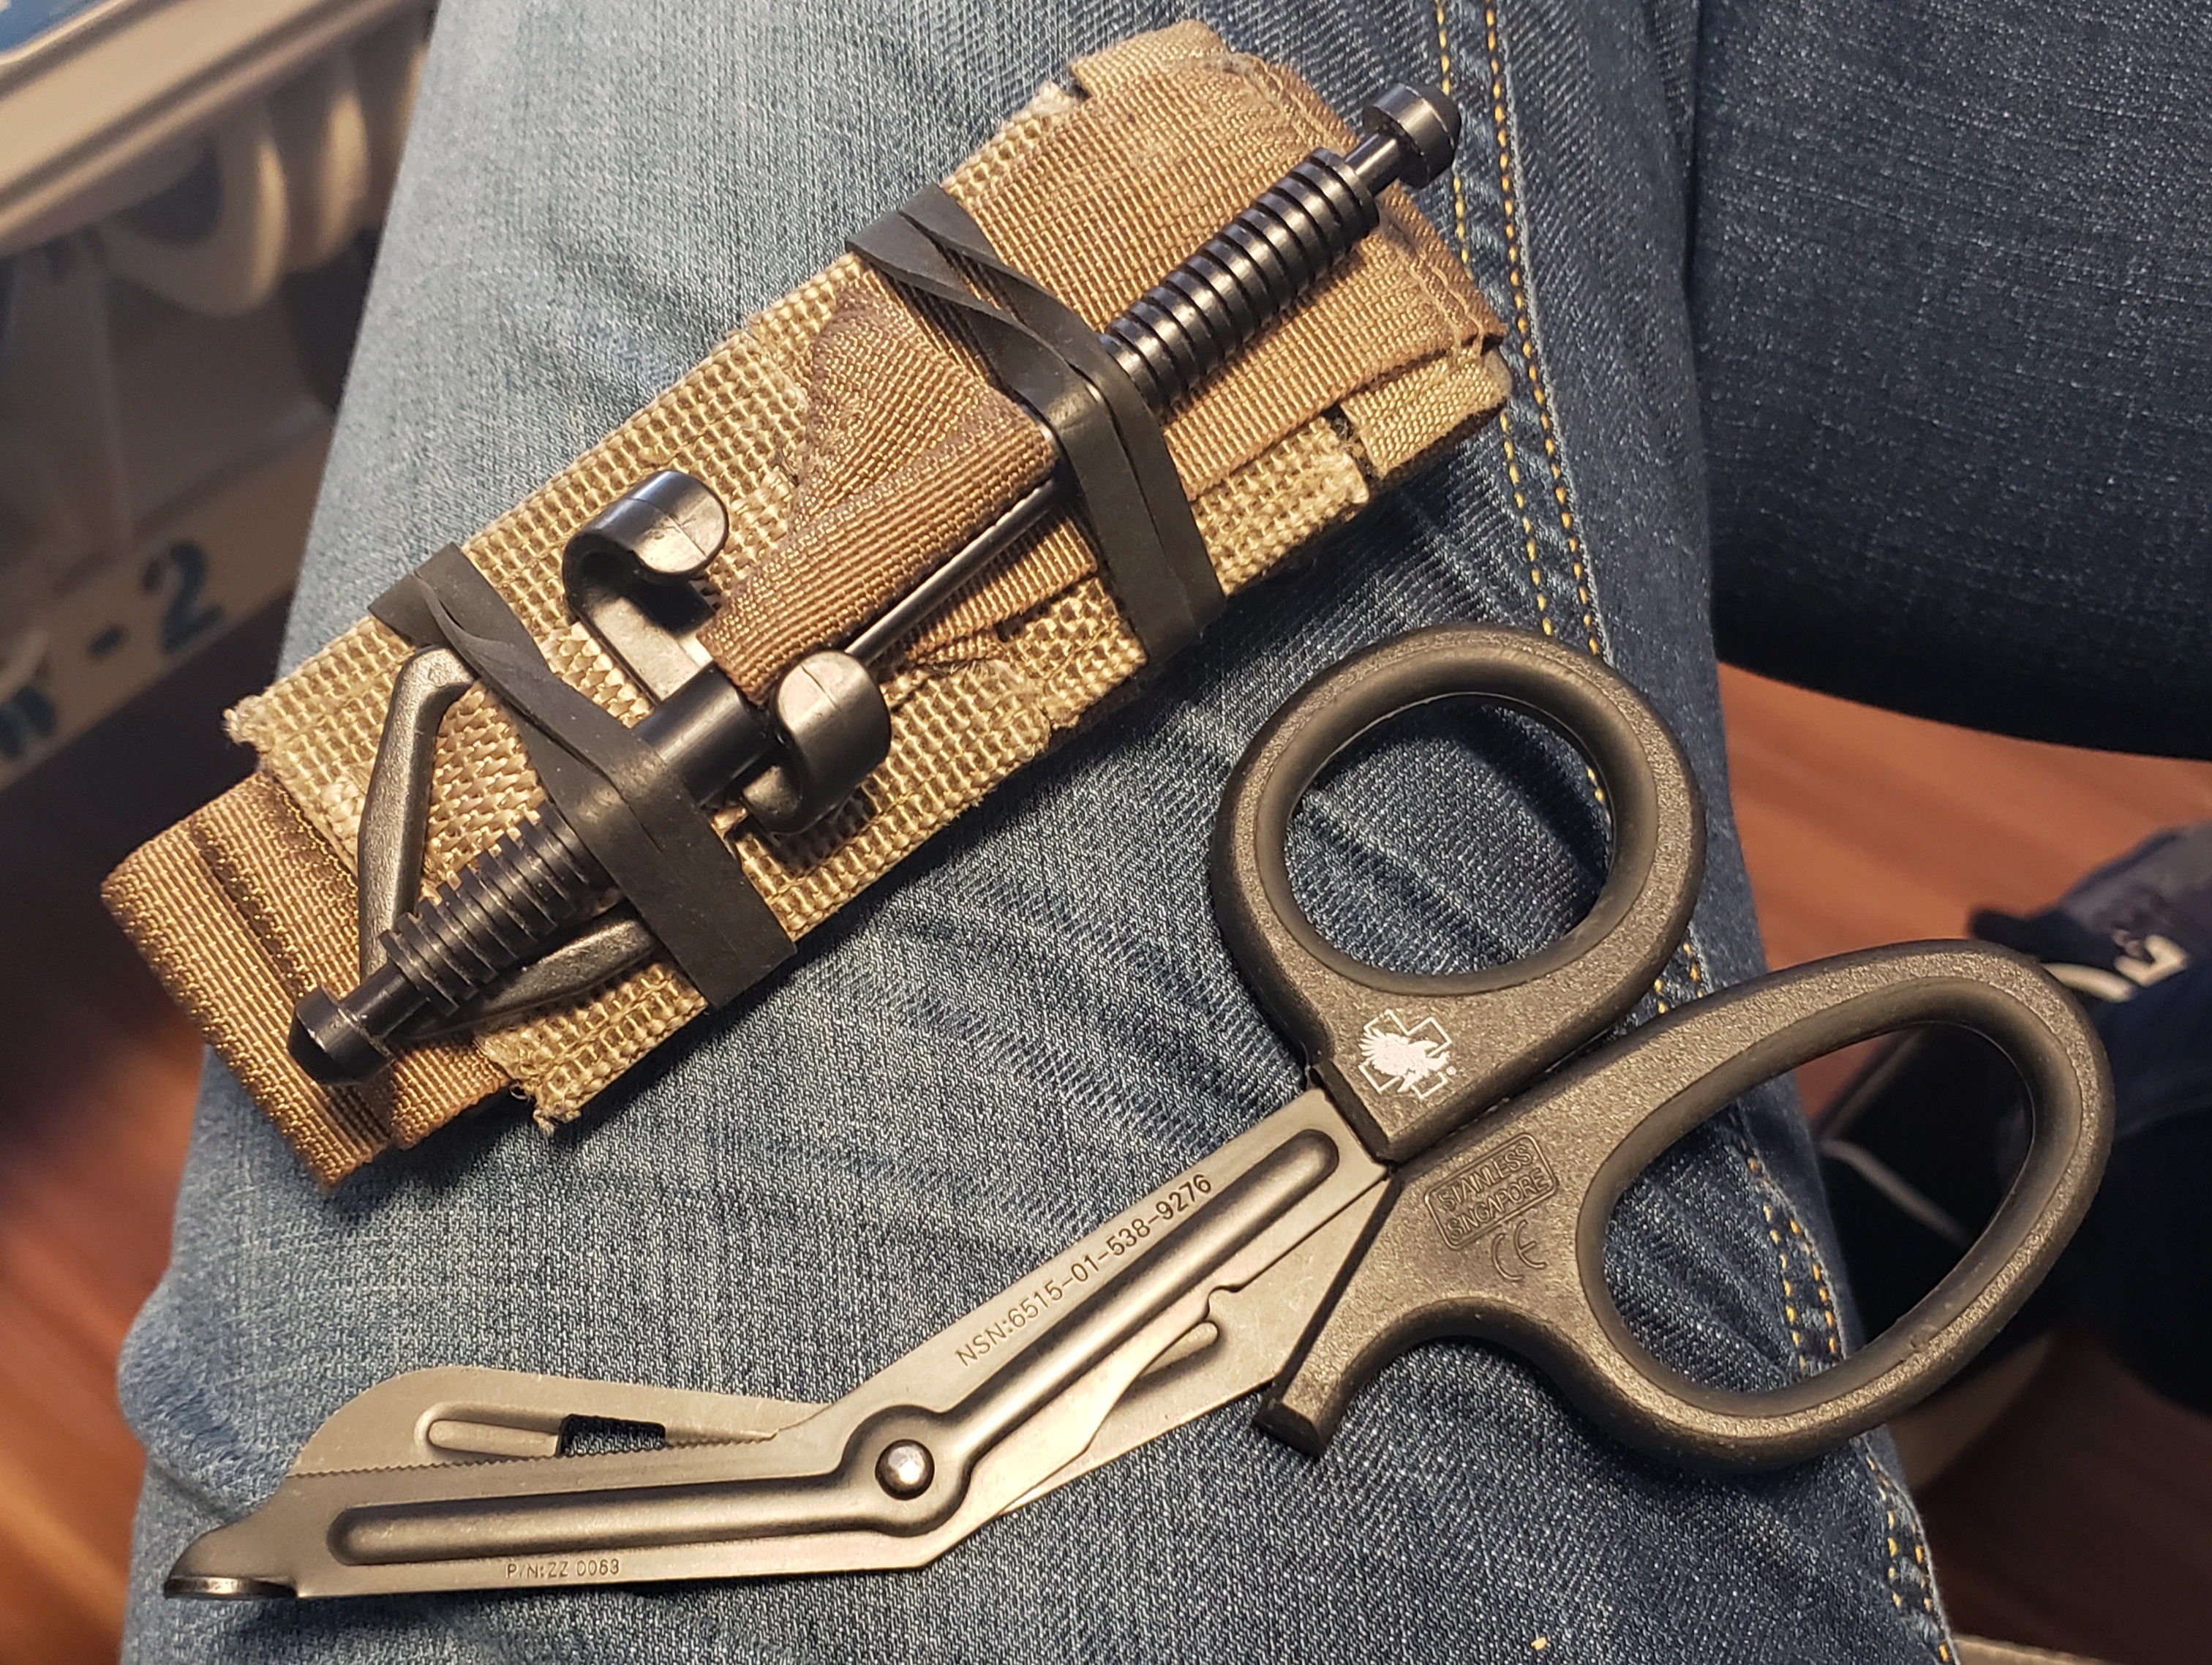 FieldCraft Survival on X: Both SOF-T Tourniquet and trauma shears are  legal to carry through TSA security. There is no reason to be without  proper medical gear when traveling.  / X